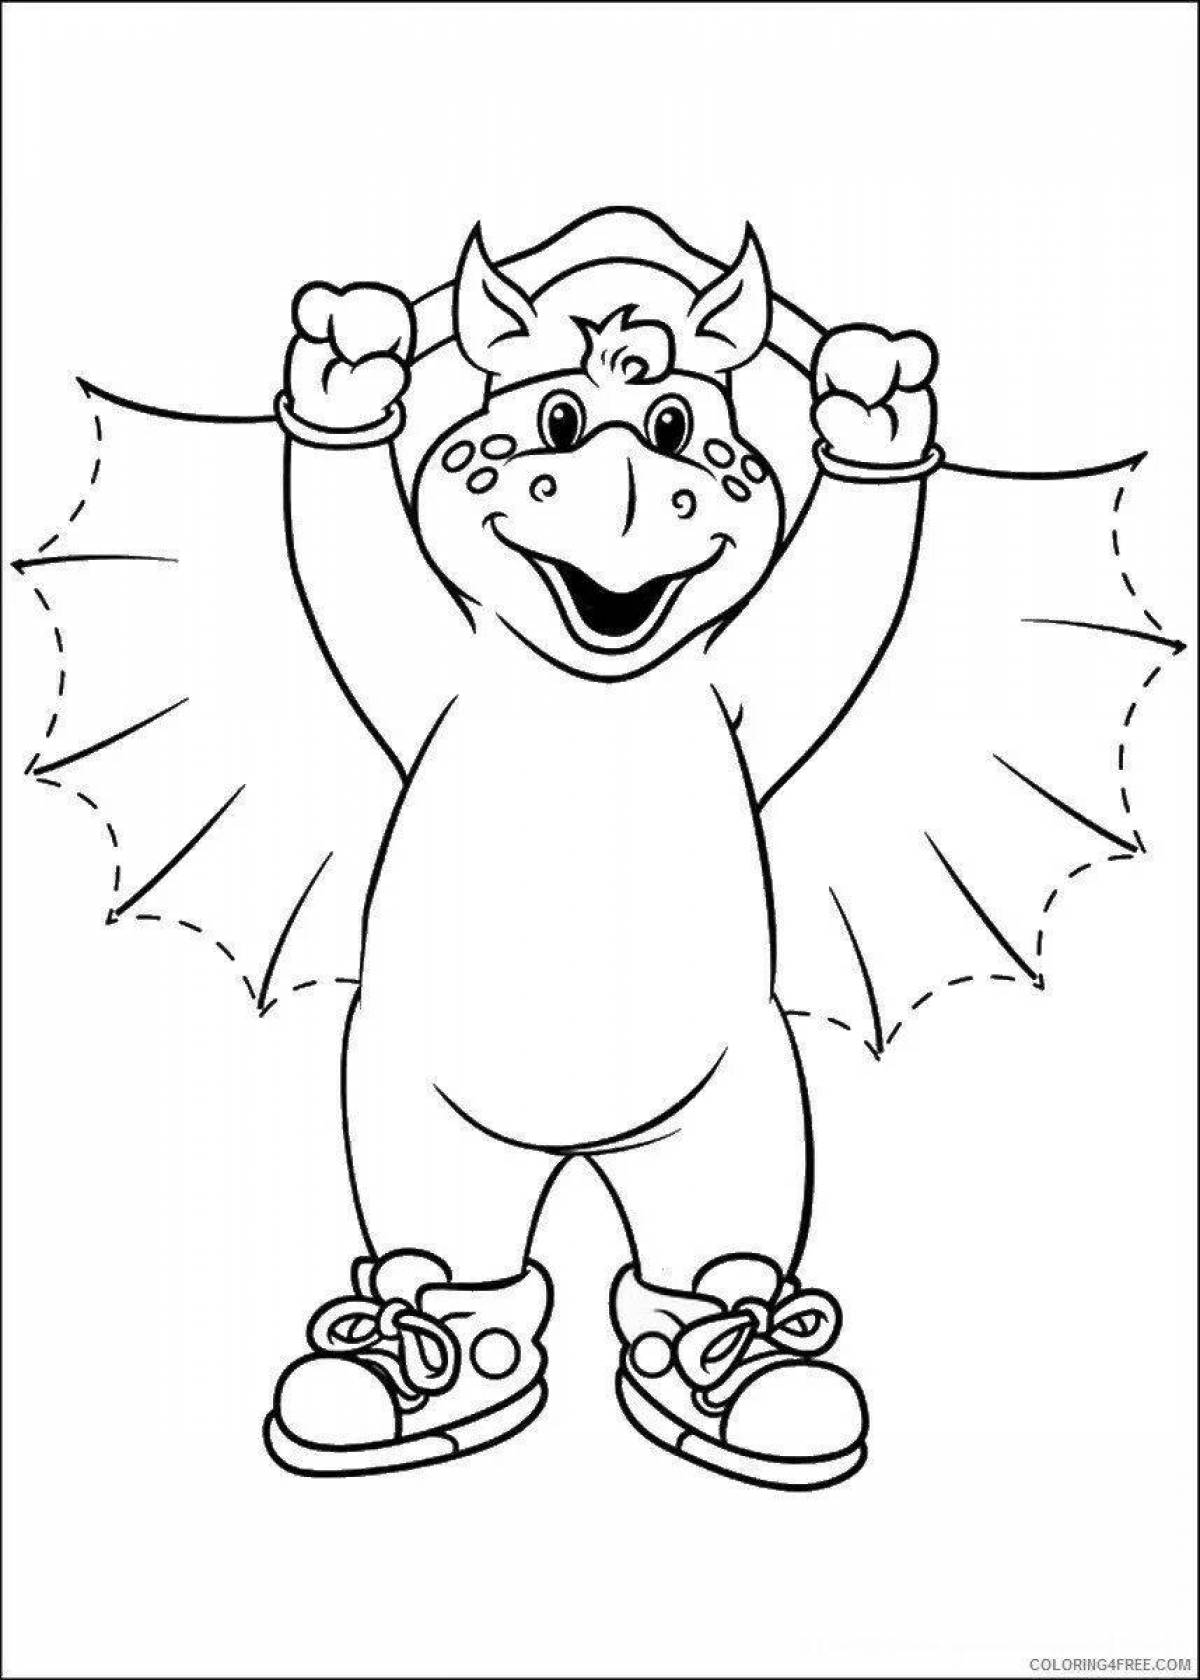 Animated barney coloring page